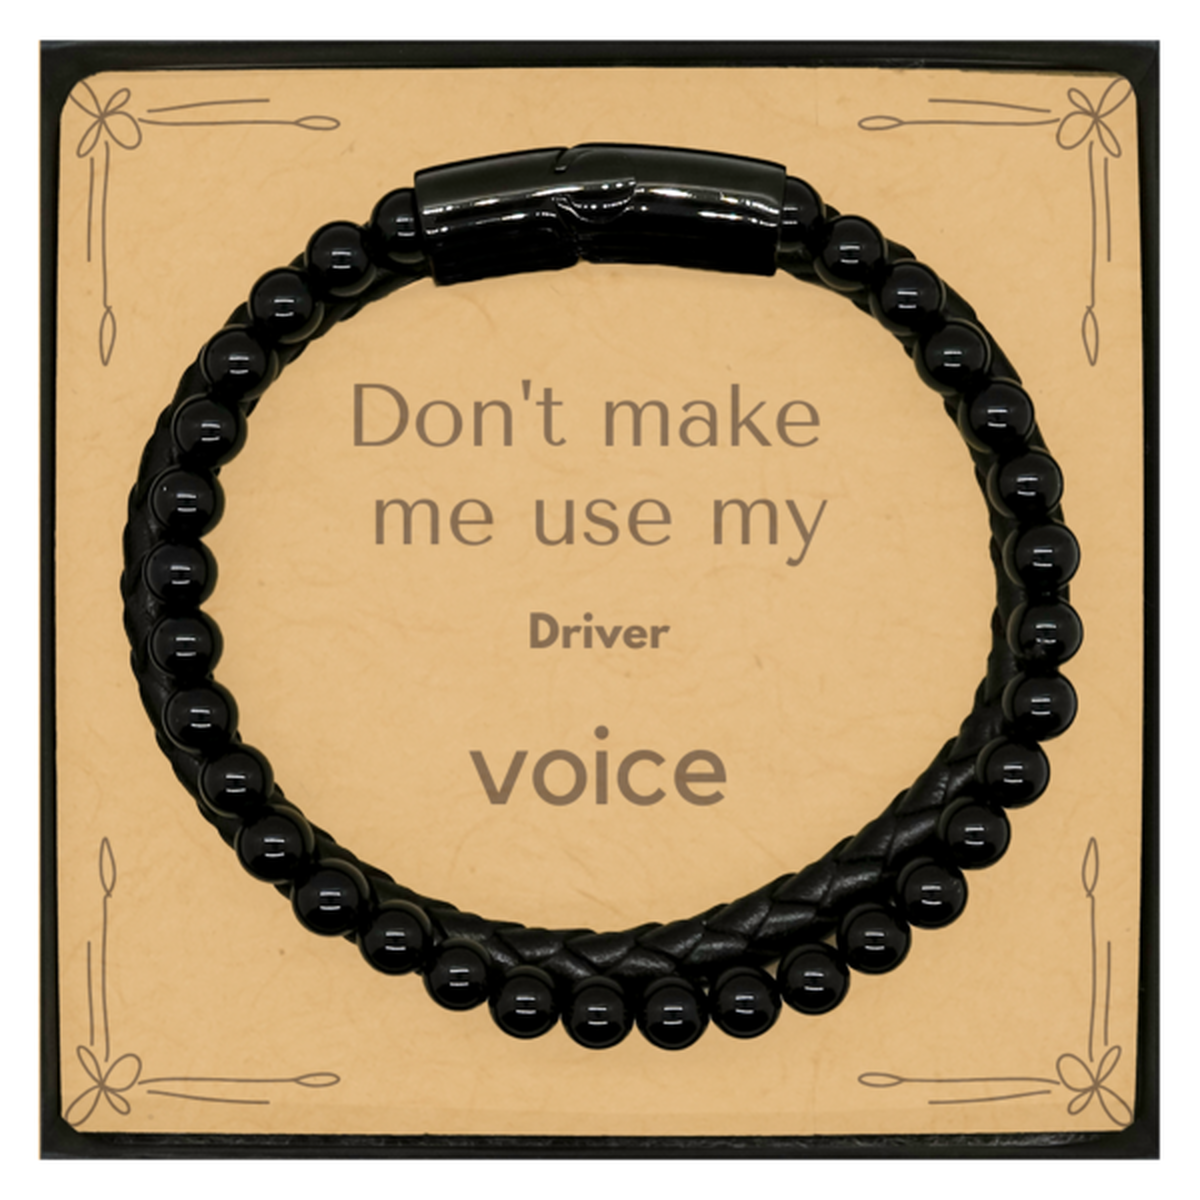 Don't make me use my Driver voice, Sarcasm Driver Card Gifts, Christmas Driver Stone Leather Bracelets Birthday Unique Gifts For Driver Coworkers, Men, Women, Colleague, Friends